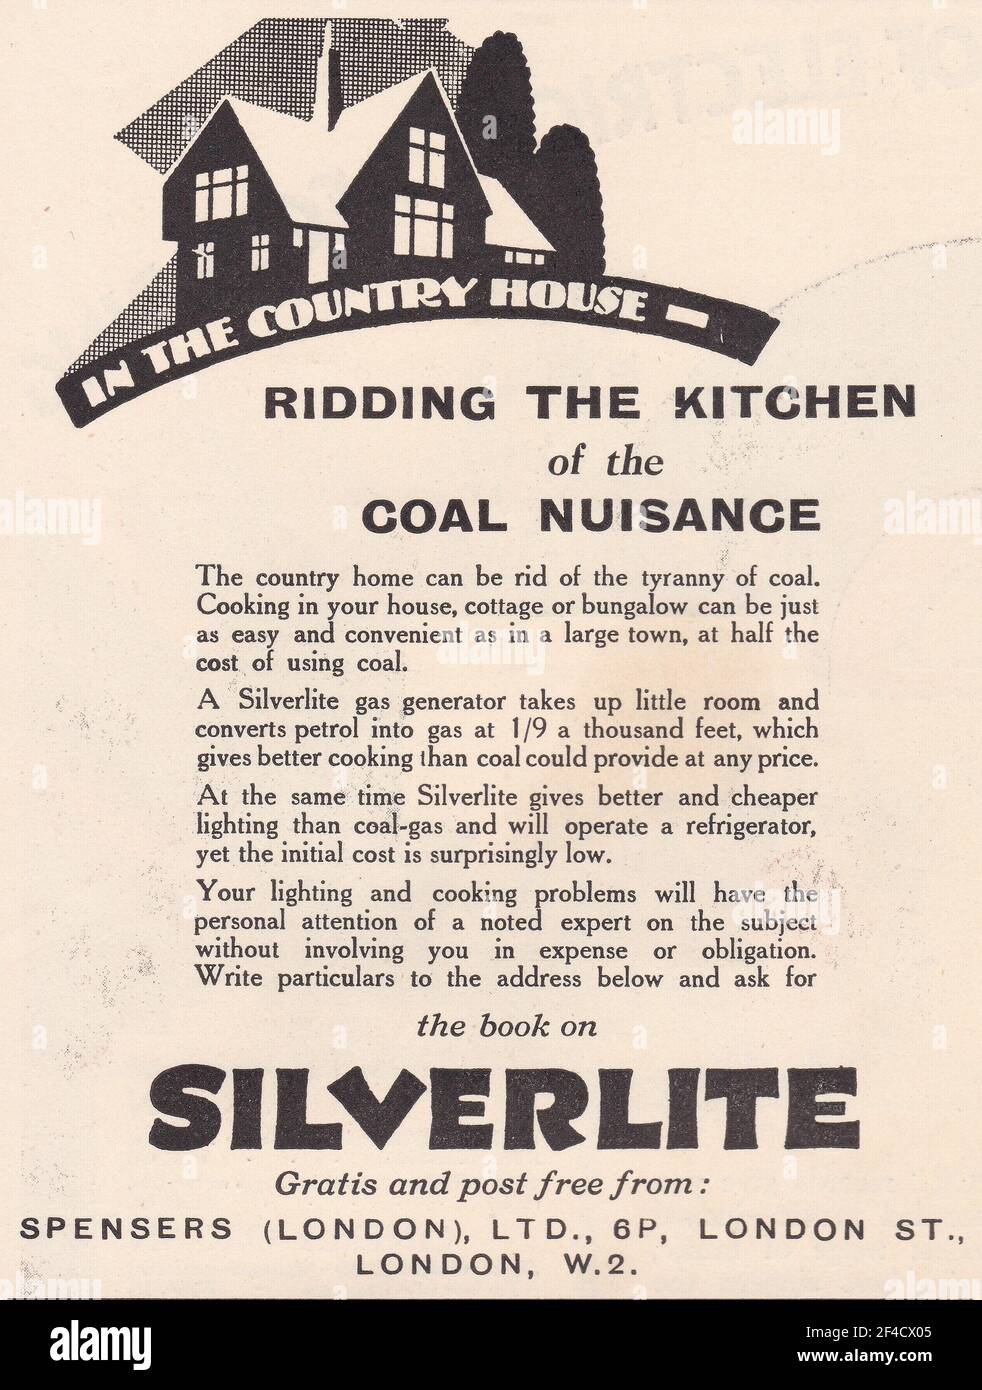 Vintage advert for The Book on Silverlite by Spensers (London) Ltd - In the Country House - Ridding the Kitchen of the Coal Nuisance. Stock Photo